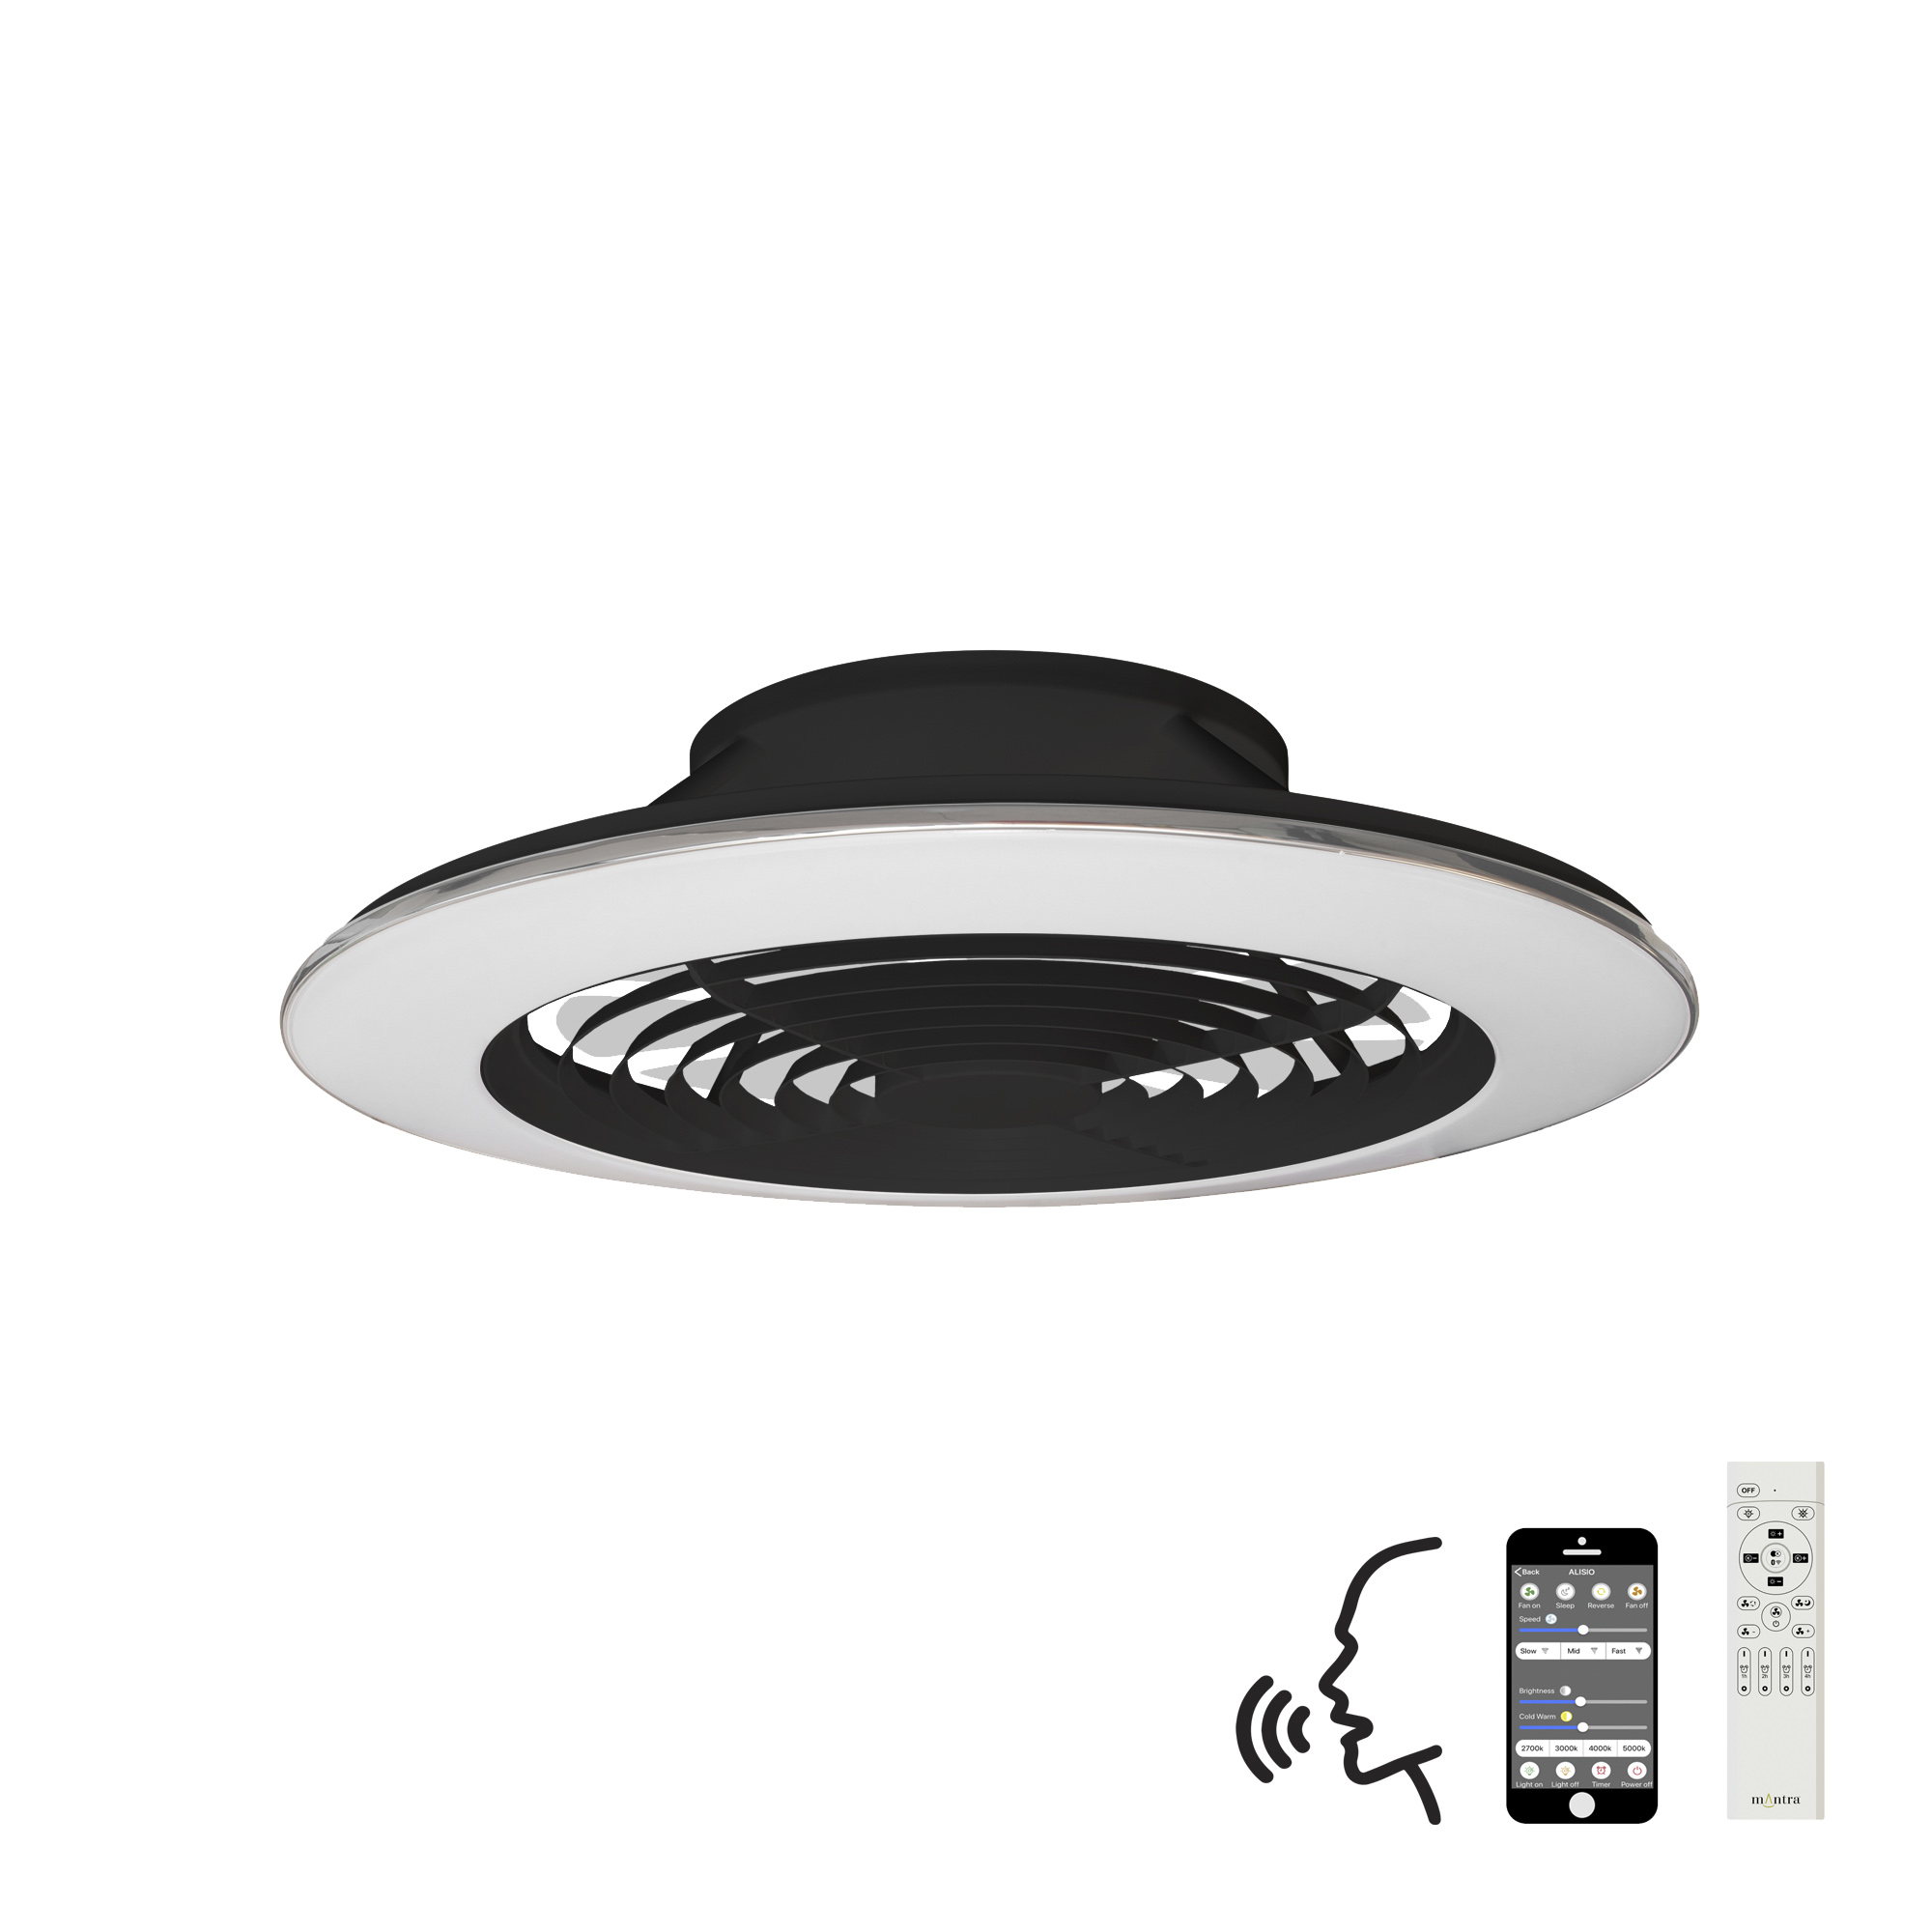 M7492  Alisio XL 95W LED Dimmable Ceiling Light & Fan, Remote / APP / Voice Controlled Black